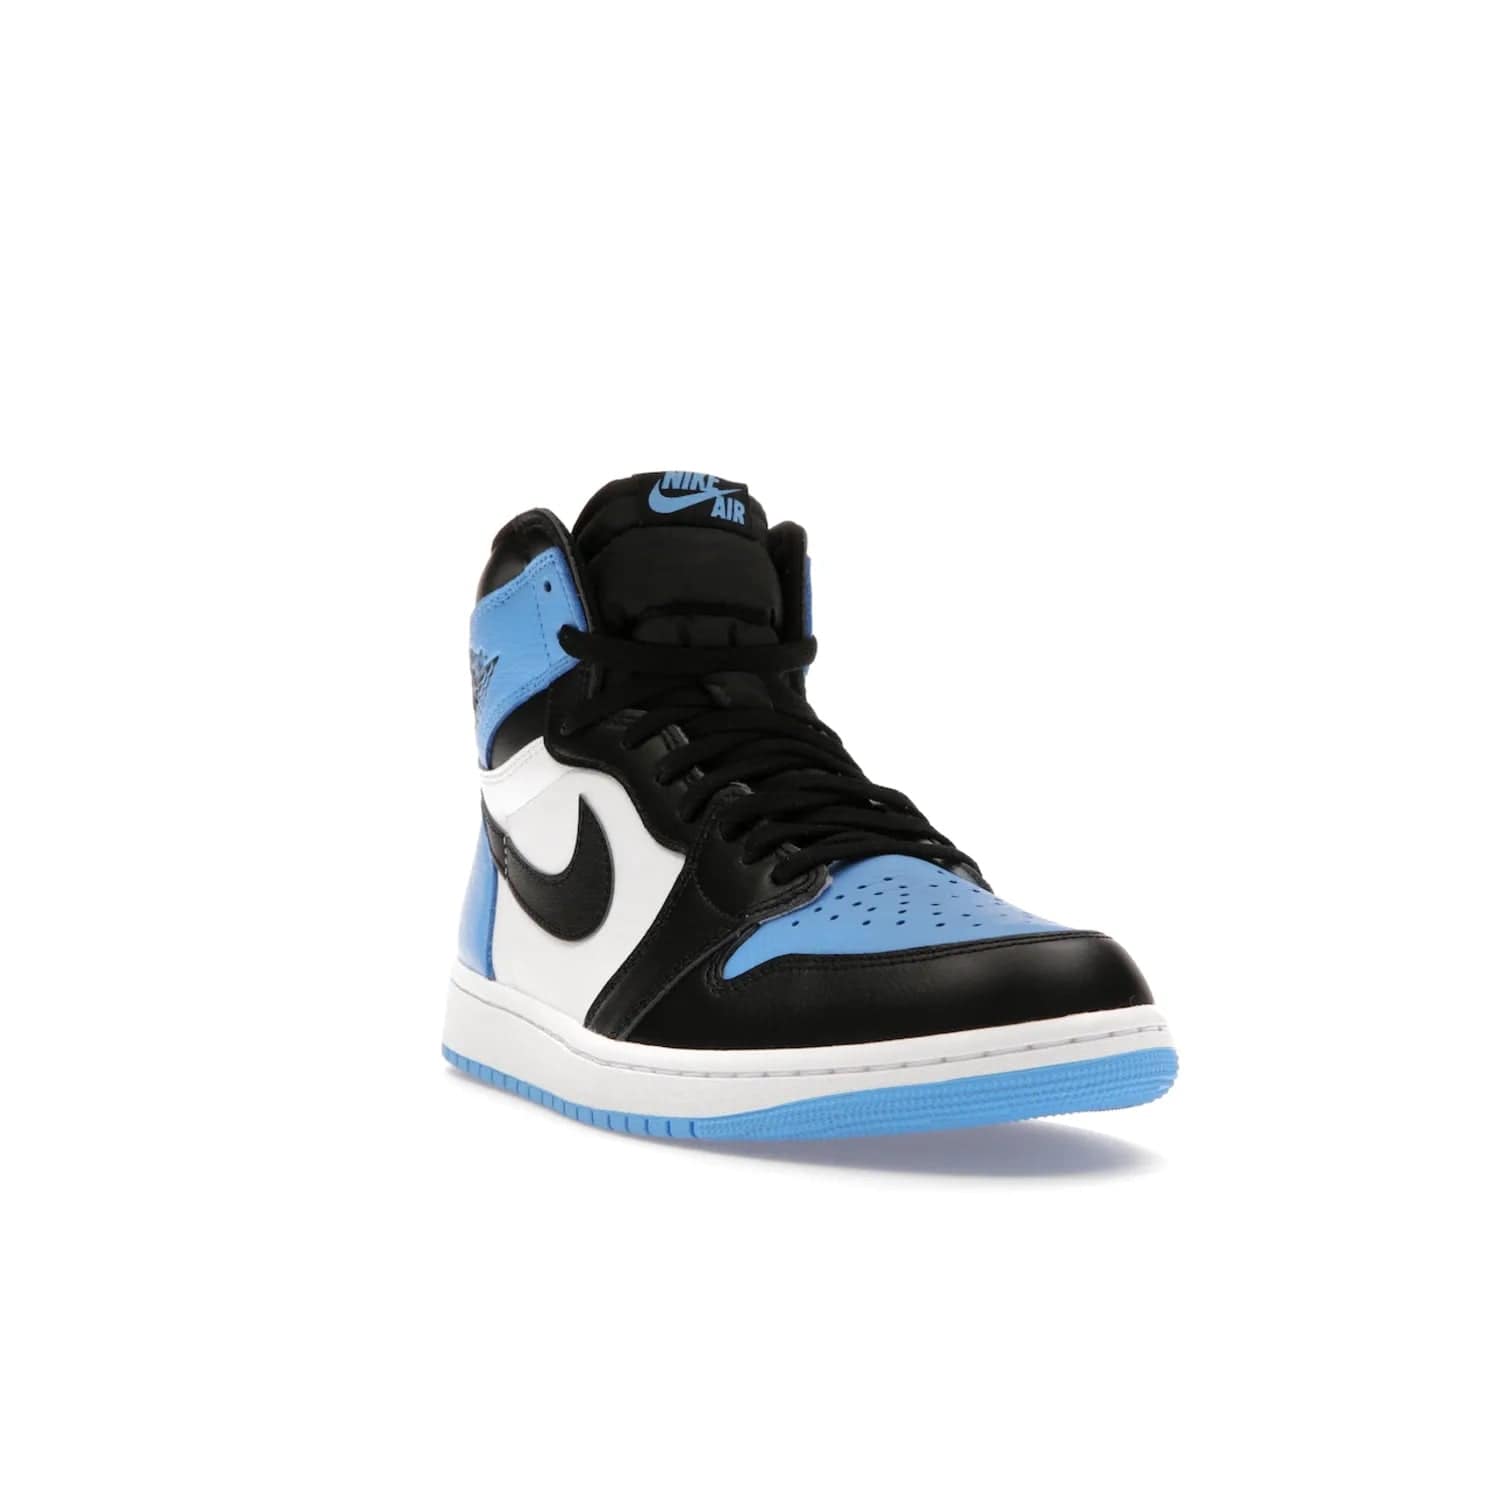 Jordan 1 Retro High OG UNC Toe - Image 7 - Only at www.BallersClubKickz.com - Jordan 1 High OG UNC Toe is a fashionable, high-quality sneaker featuring University Blue, Black White and White. Releasing July 22, 2023, it's the perfect pick up for sneakerheads.